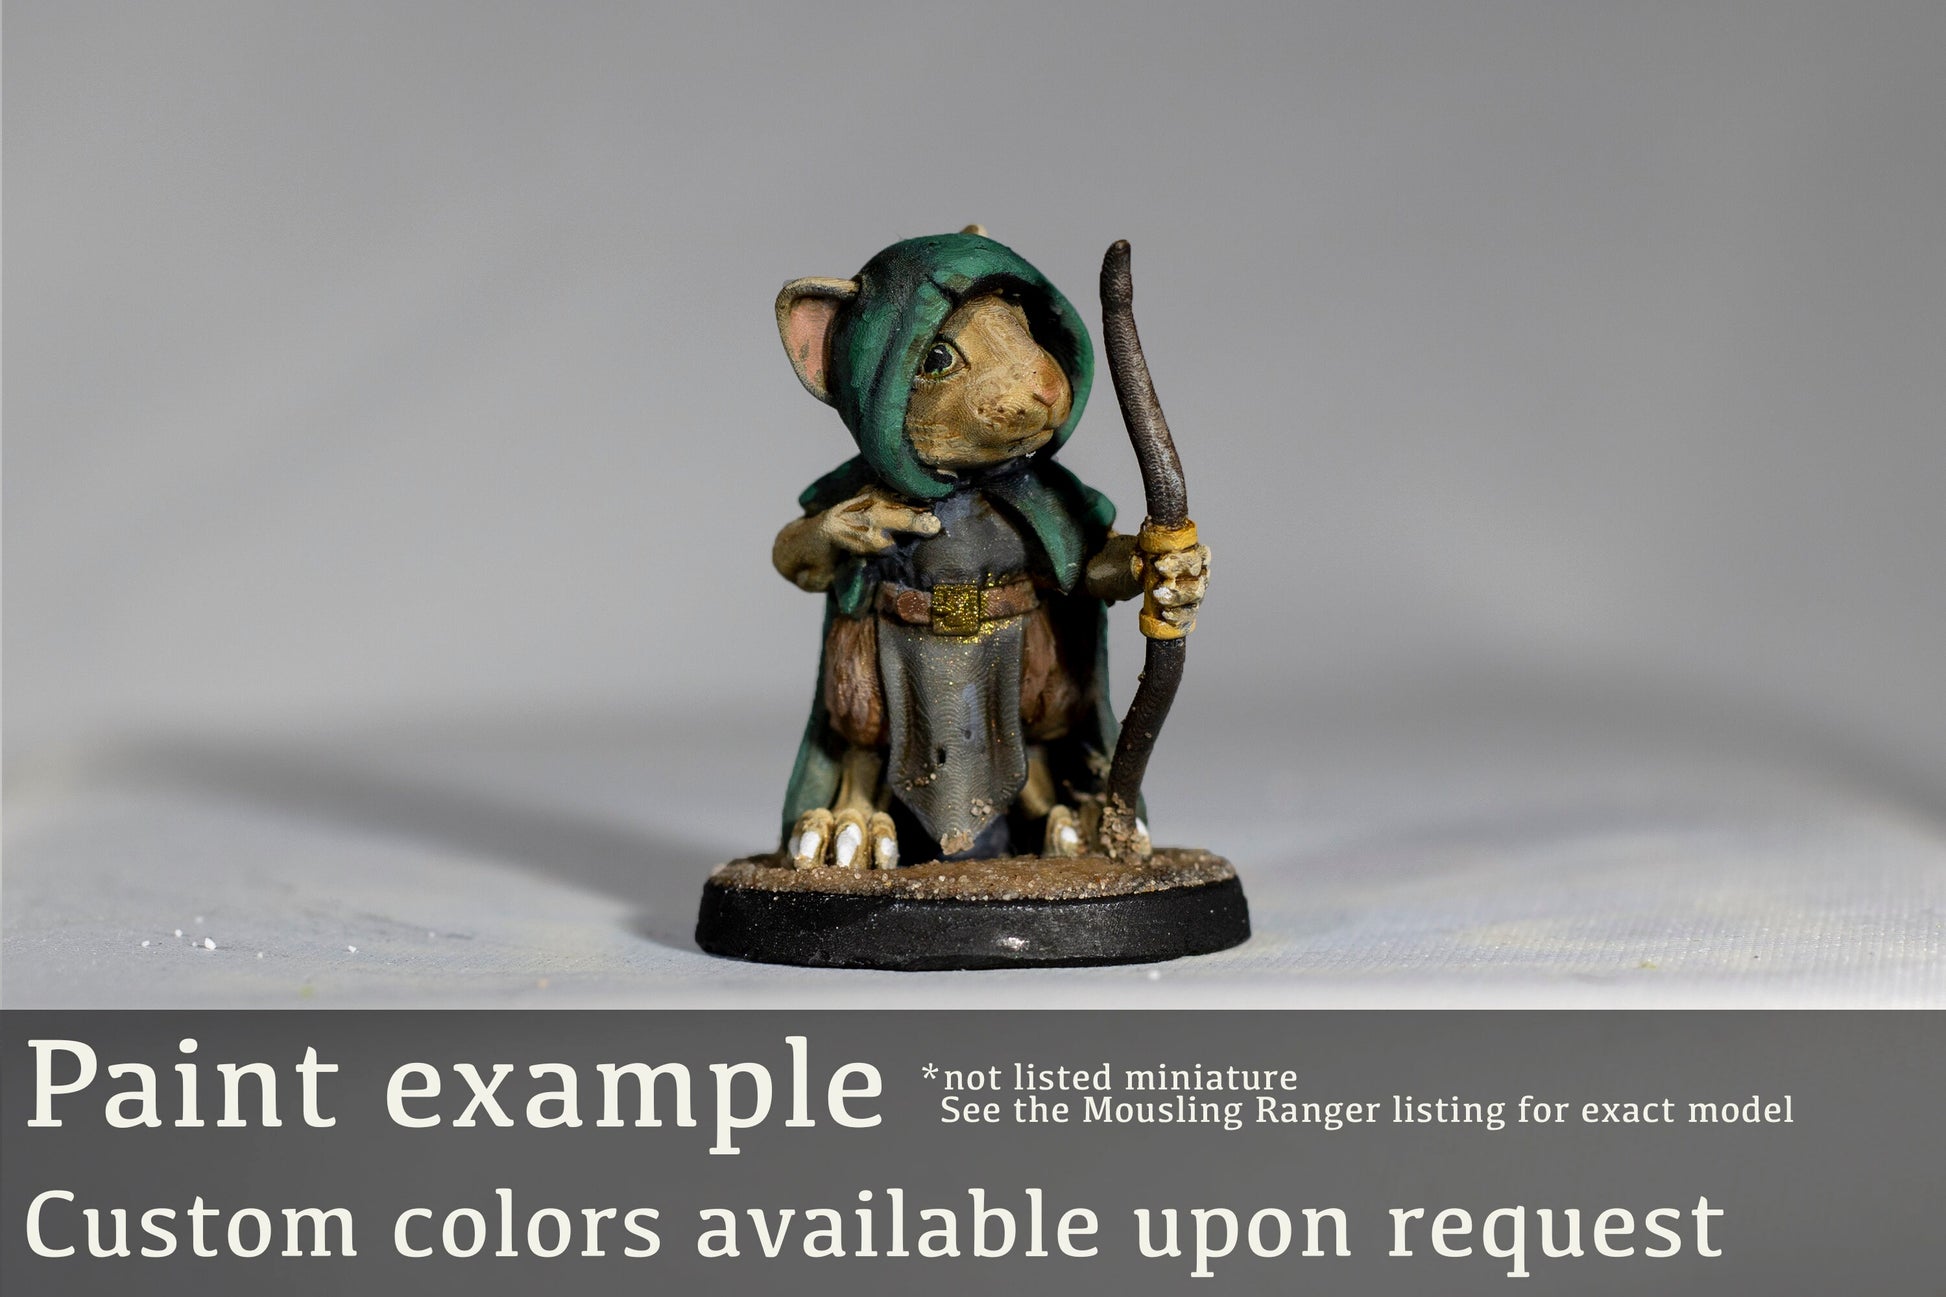 Christmas Gnome - Cast n Play Printed Miniature Figurine | Dungeons & Dragons | Pathfinder | Tabletop